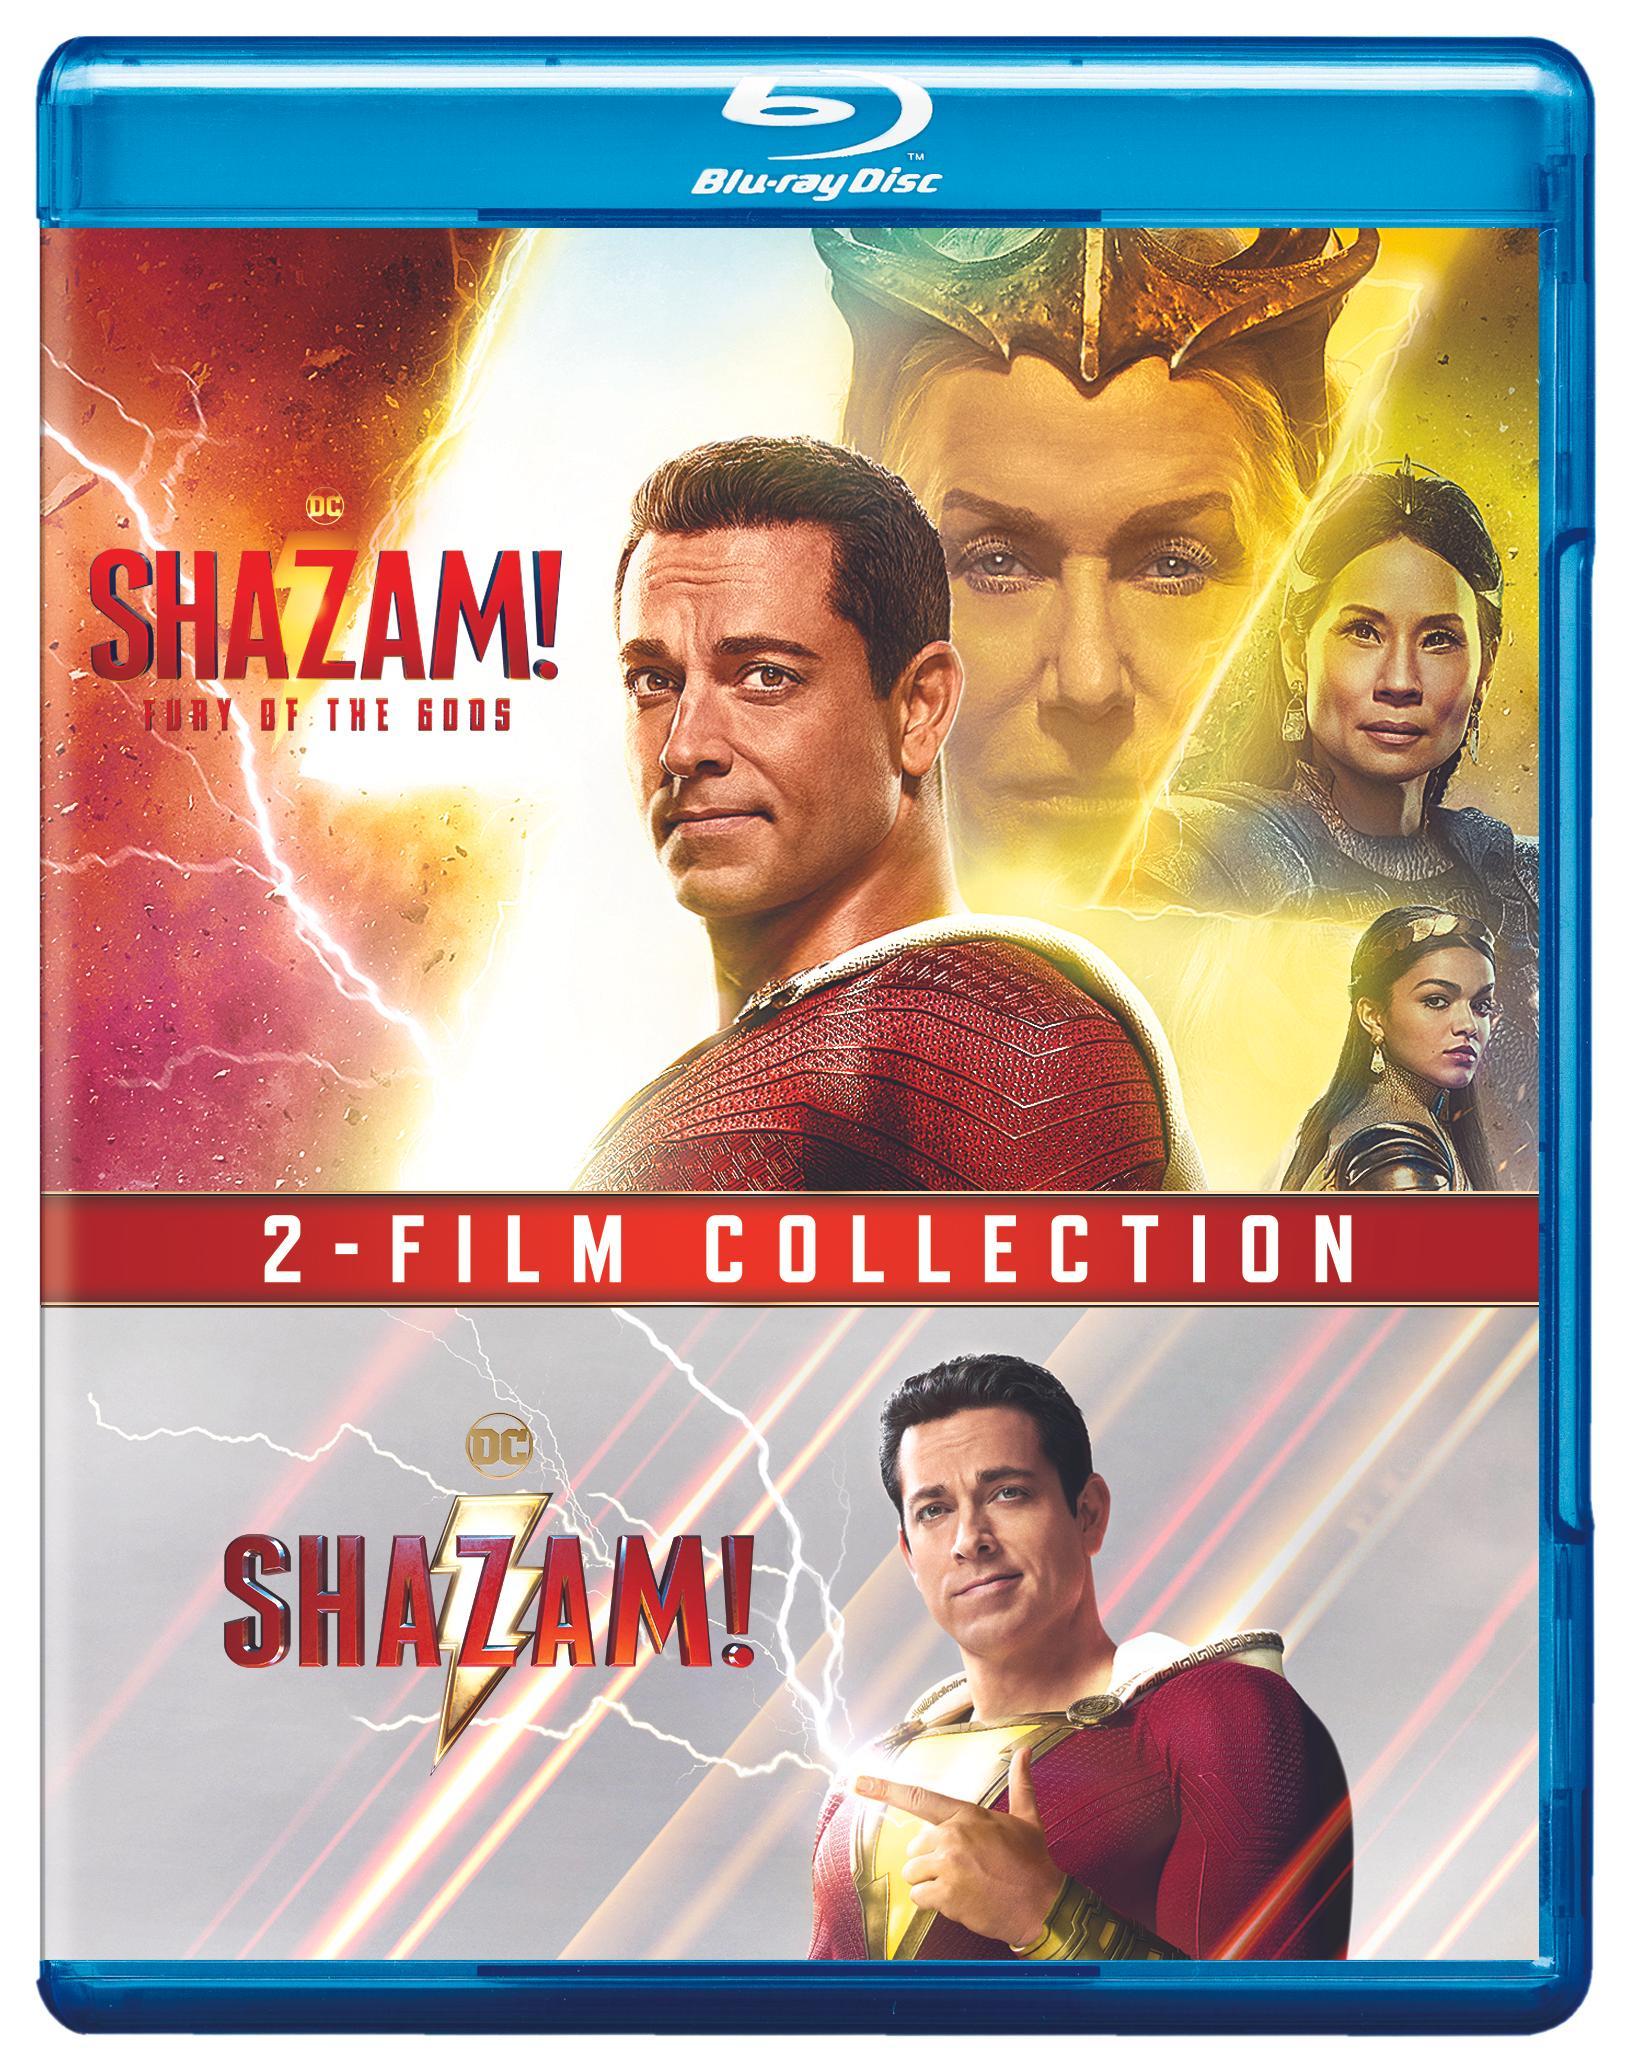 Shazam! 2-Film Collection (Blu-ray Double Feature) - Blu-ray [ 2023 ]  - Adventure Movies On Blu-ray - Movies On GRUV